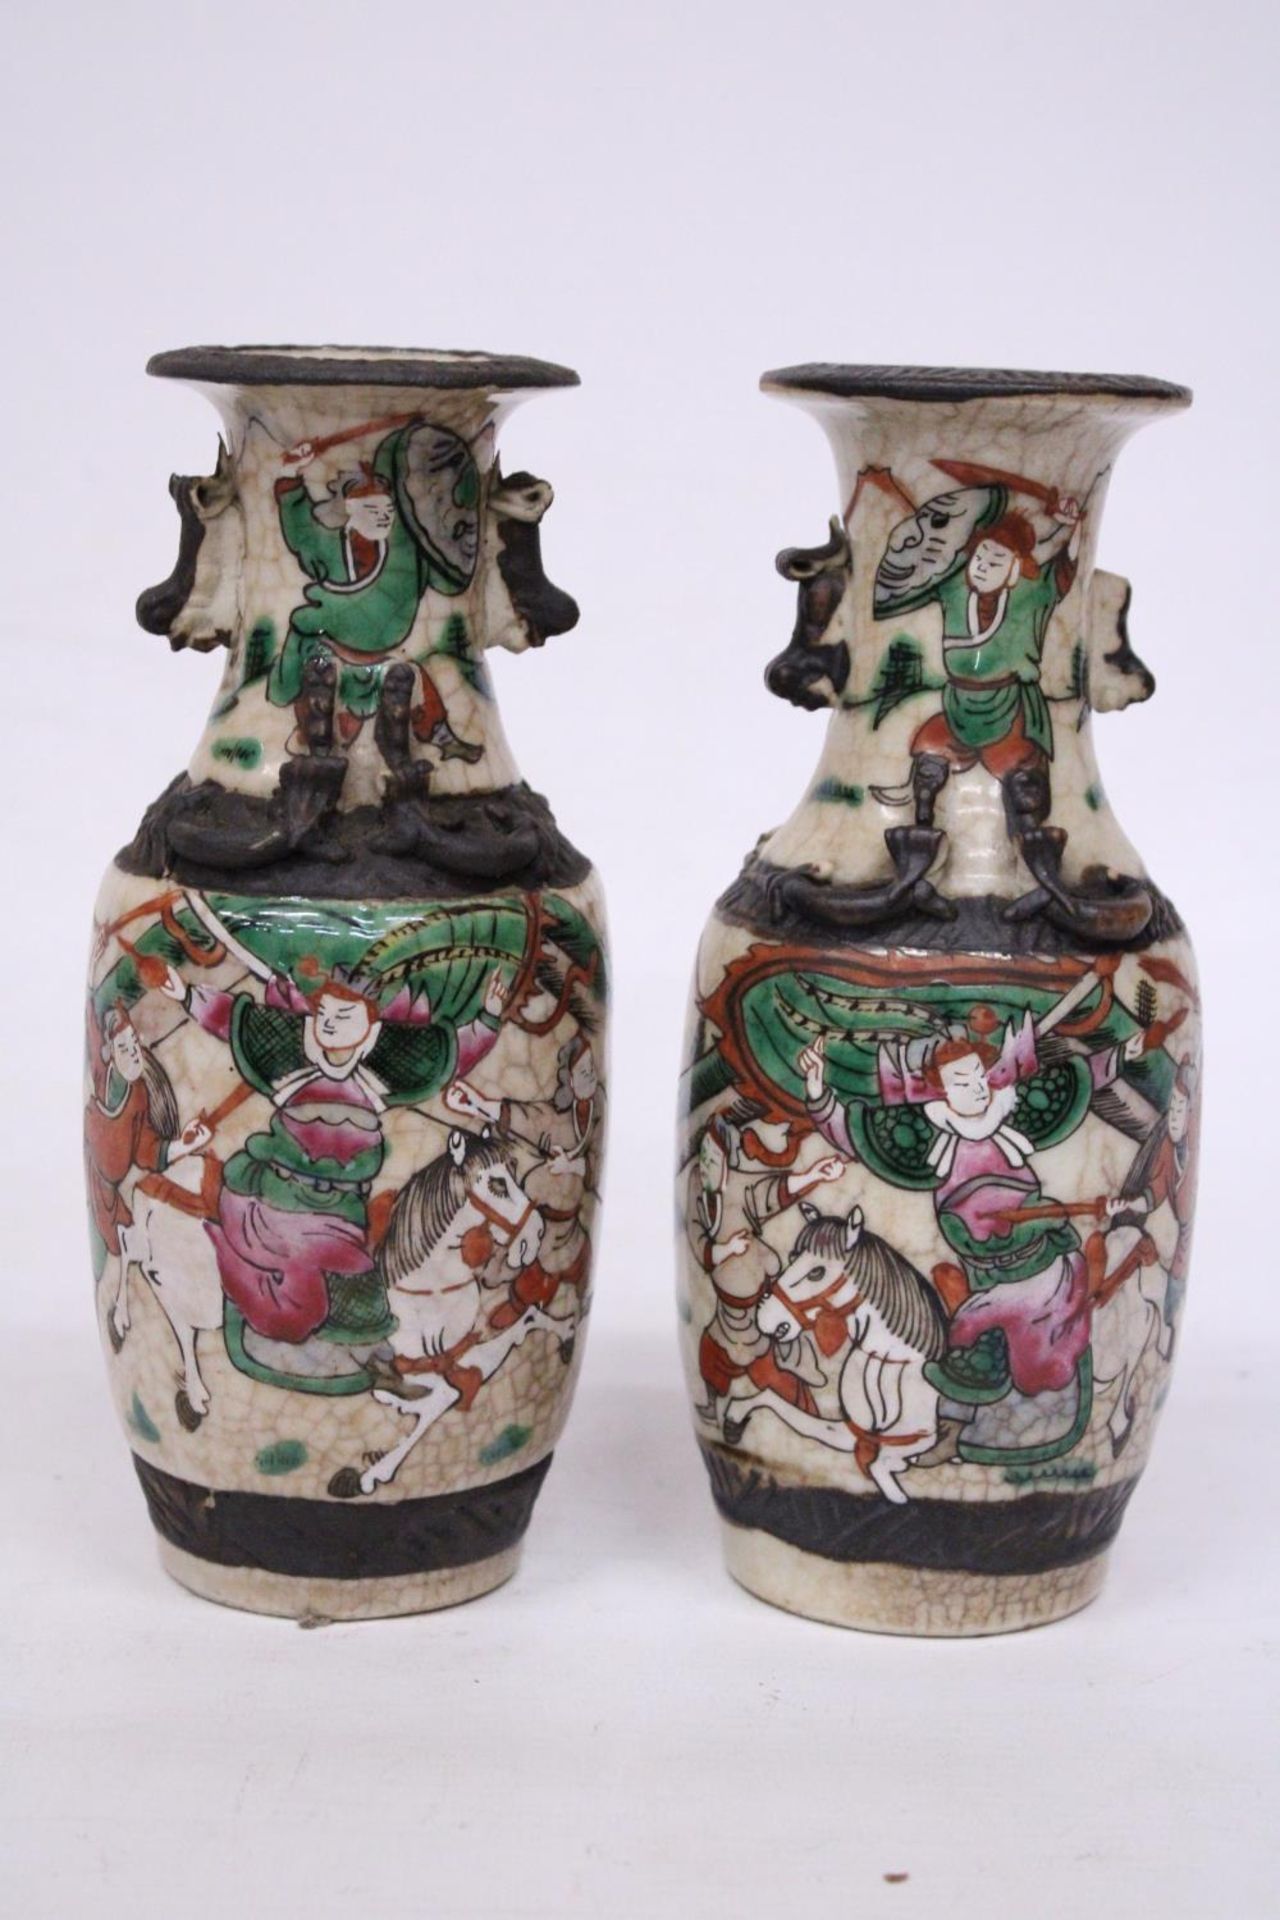 A PAIR OF CHINESE CRACKLE GLAZED VASES WITH WARRIOR SCENES - 18 CM (H) - MARK TO BASE - Image 3 of 6